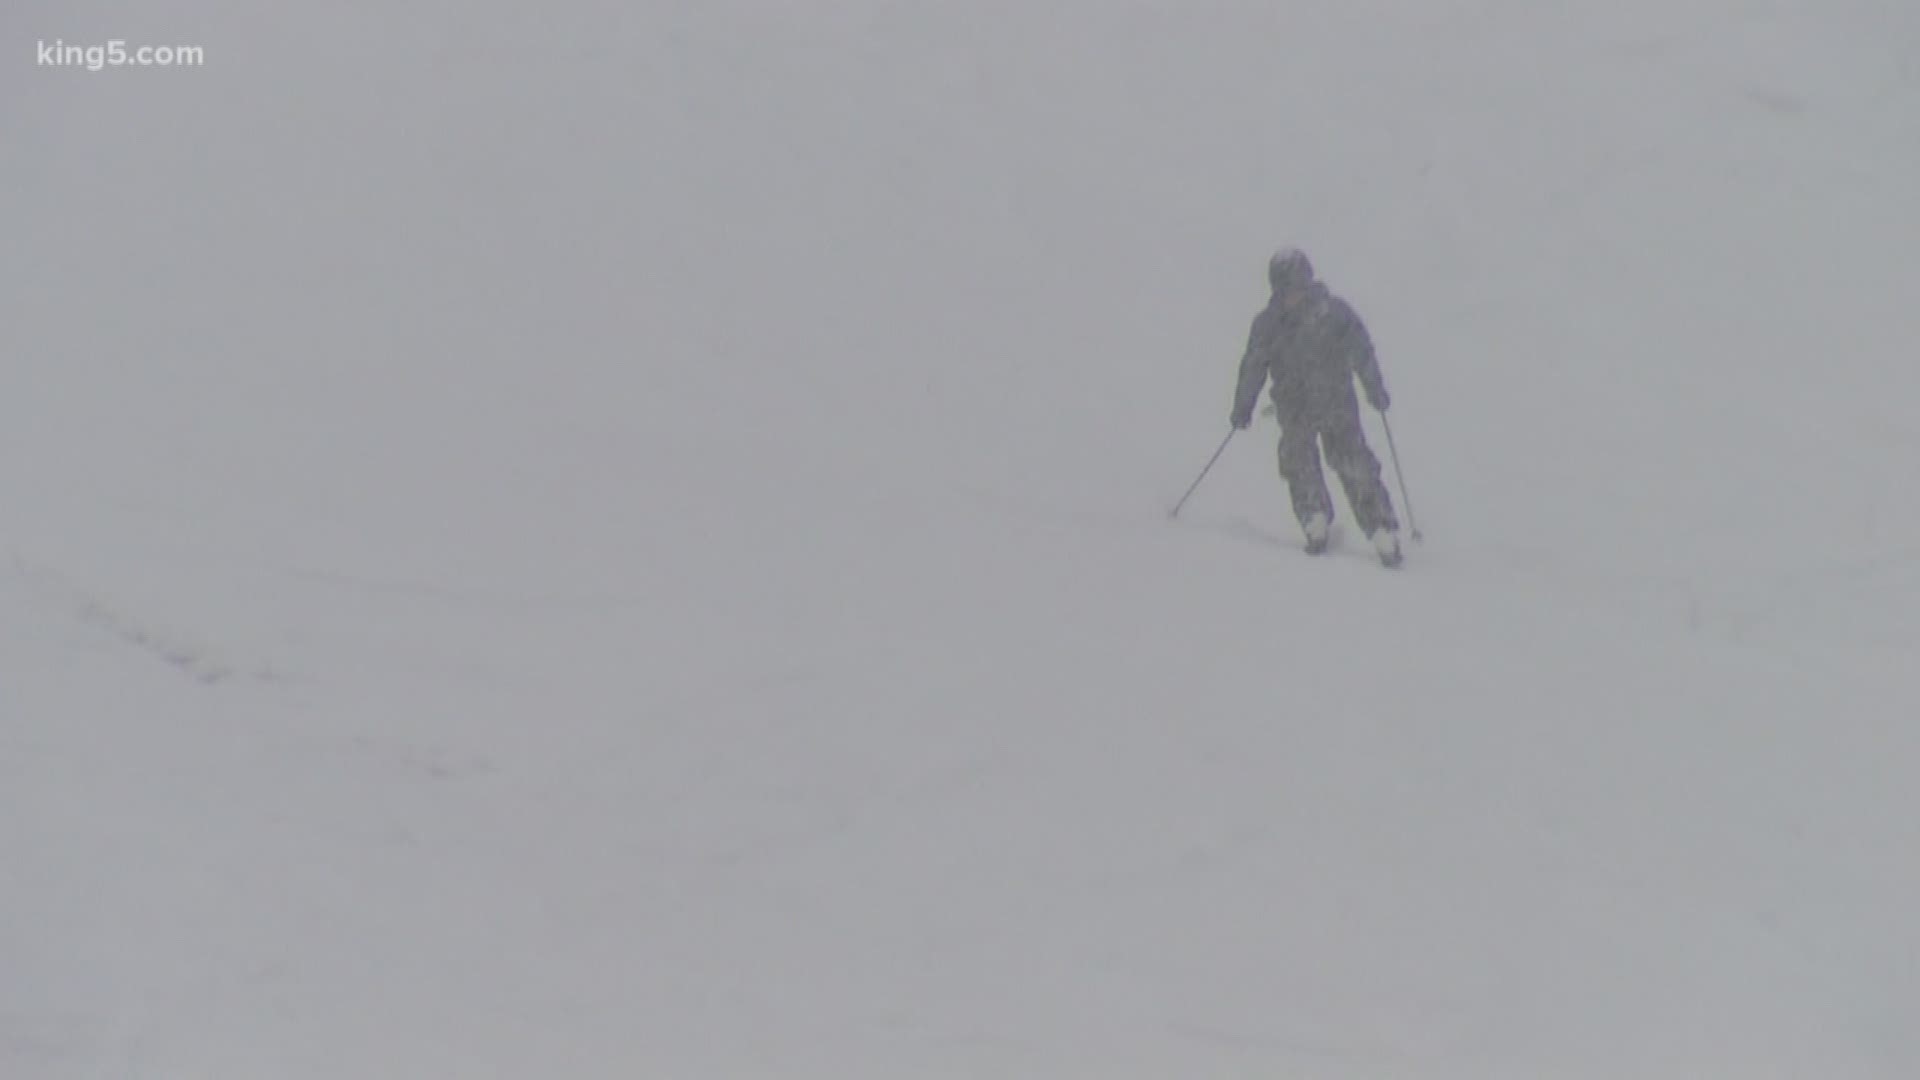 It's been a struggle to get all of Washington's ski resorts open, it's been warm over the past few days. But change might be coming